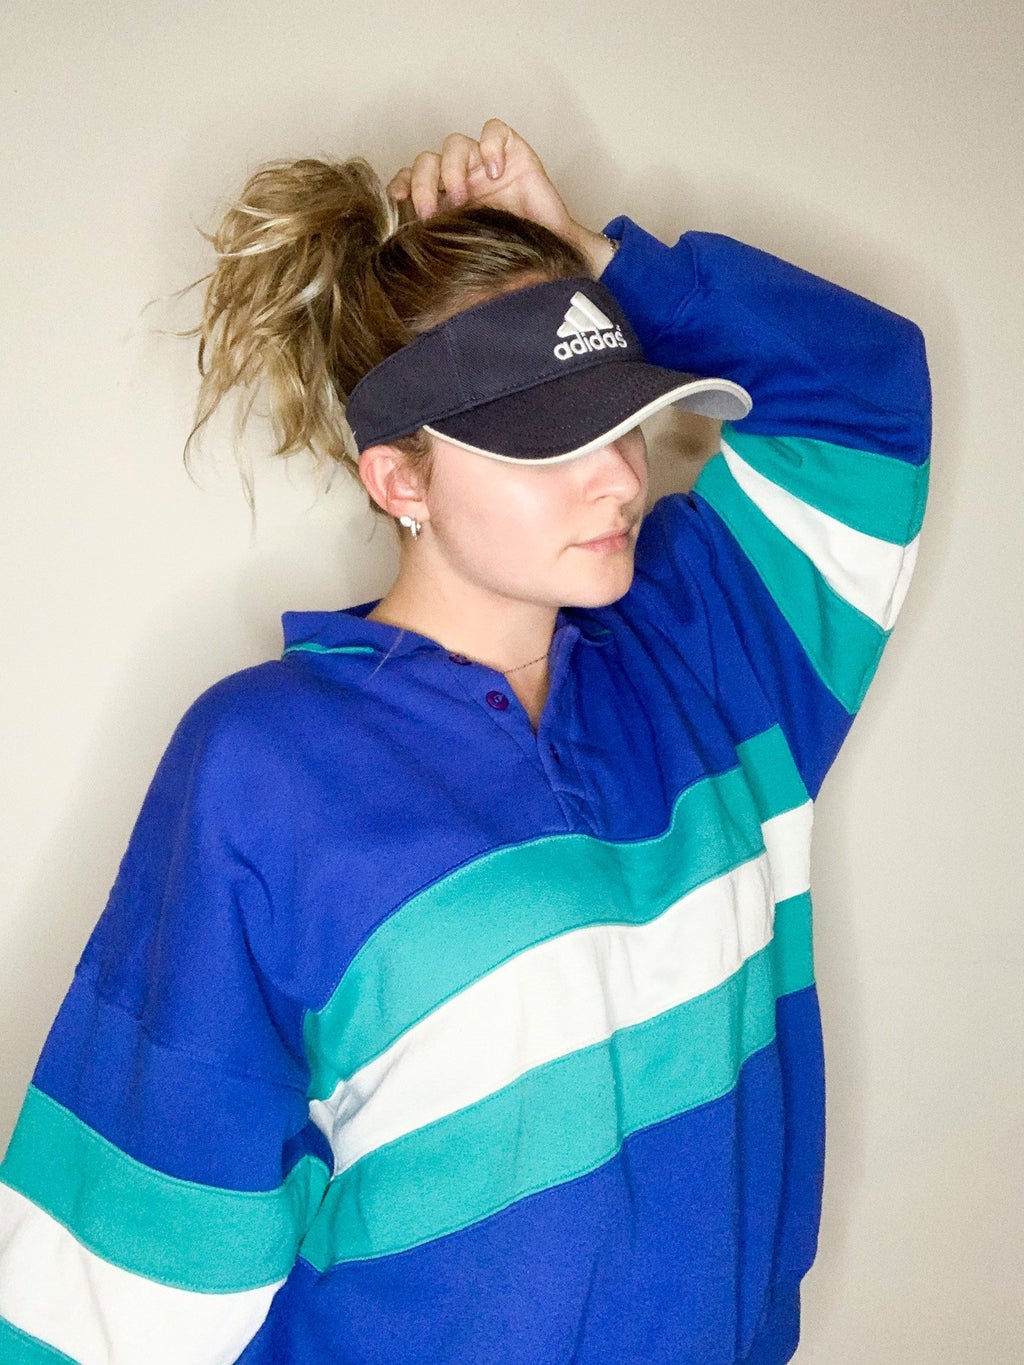 sporting an adidas hat and sweatshirt with white background